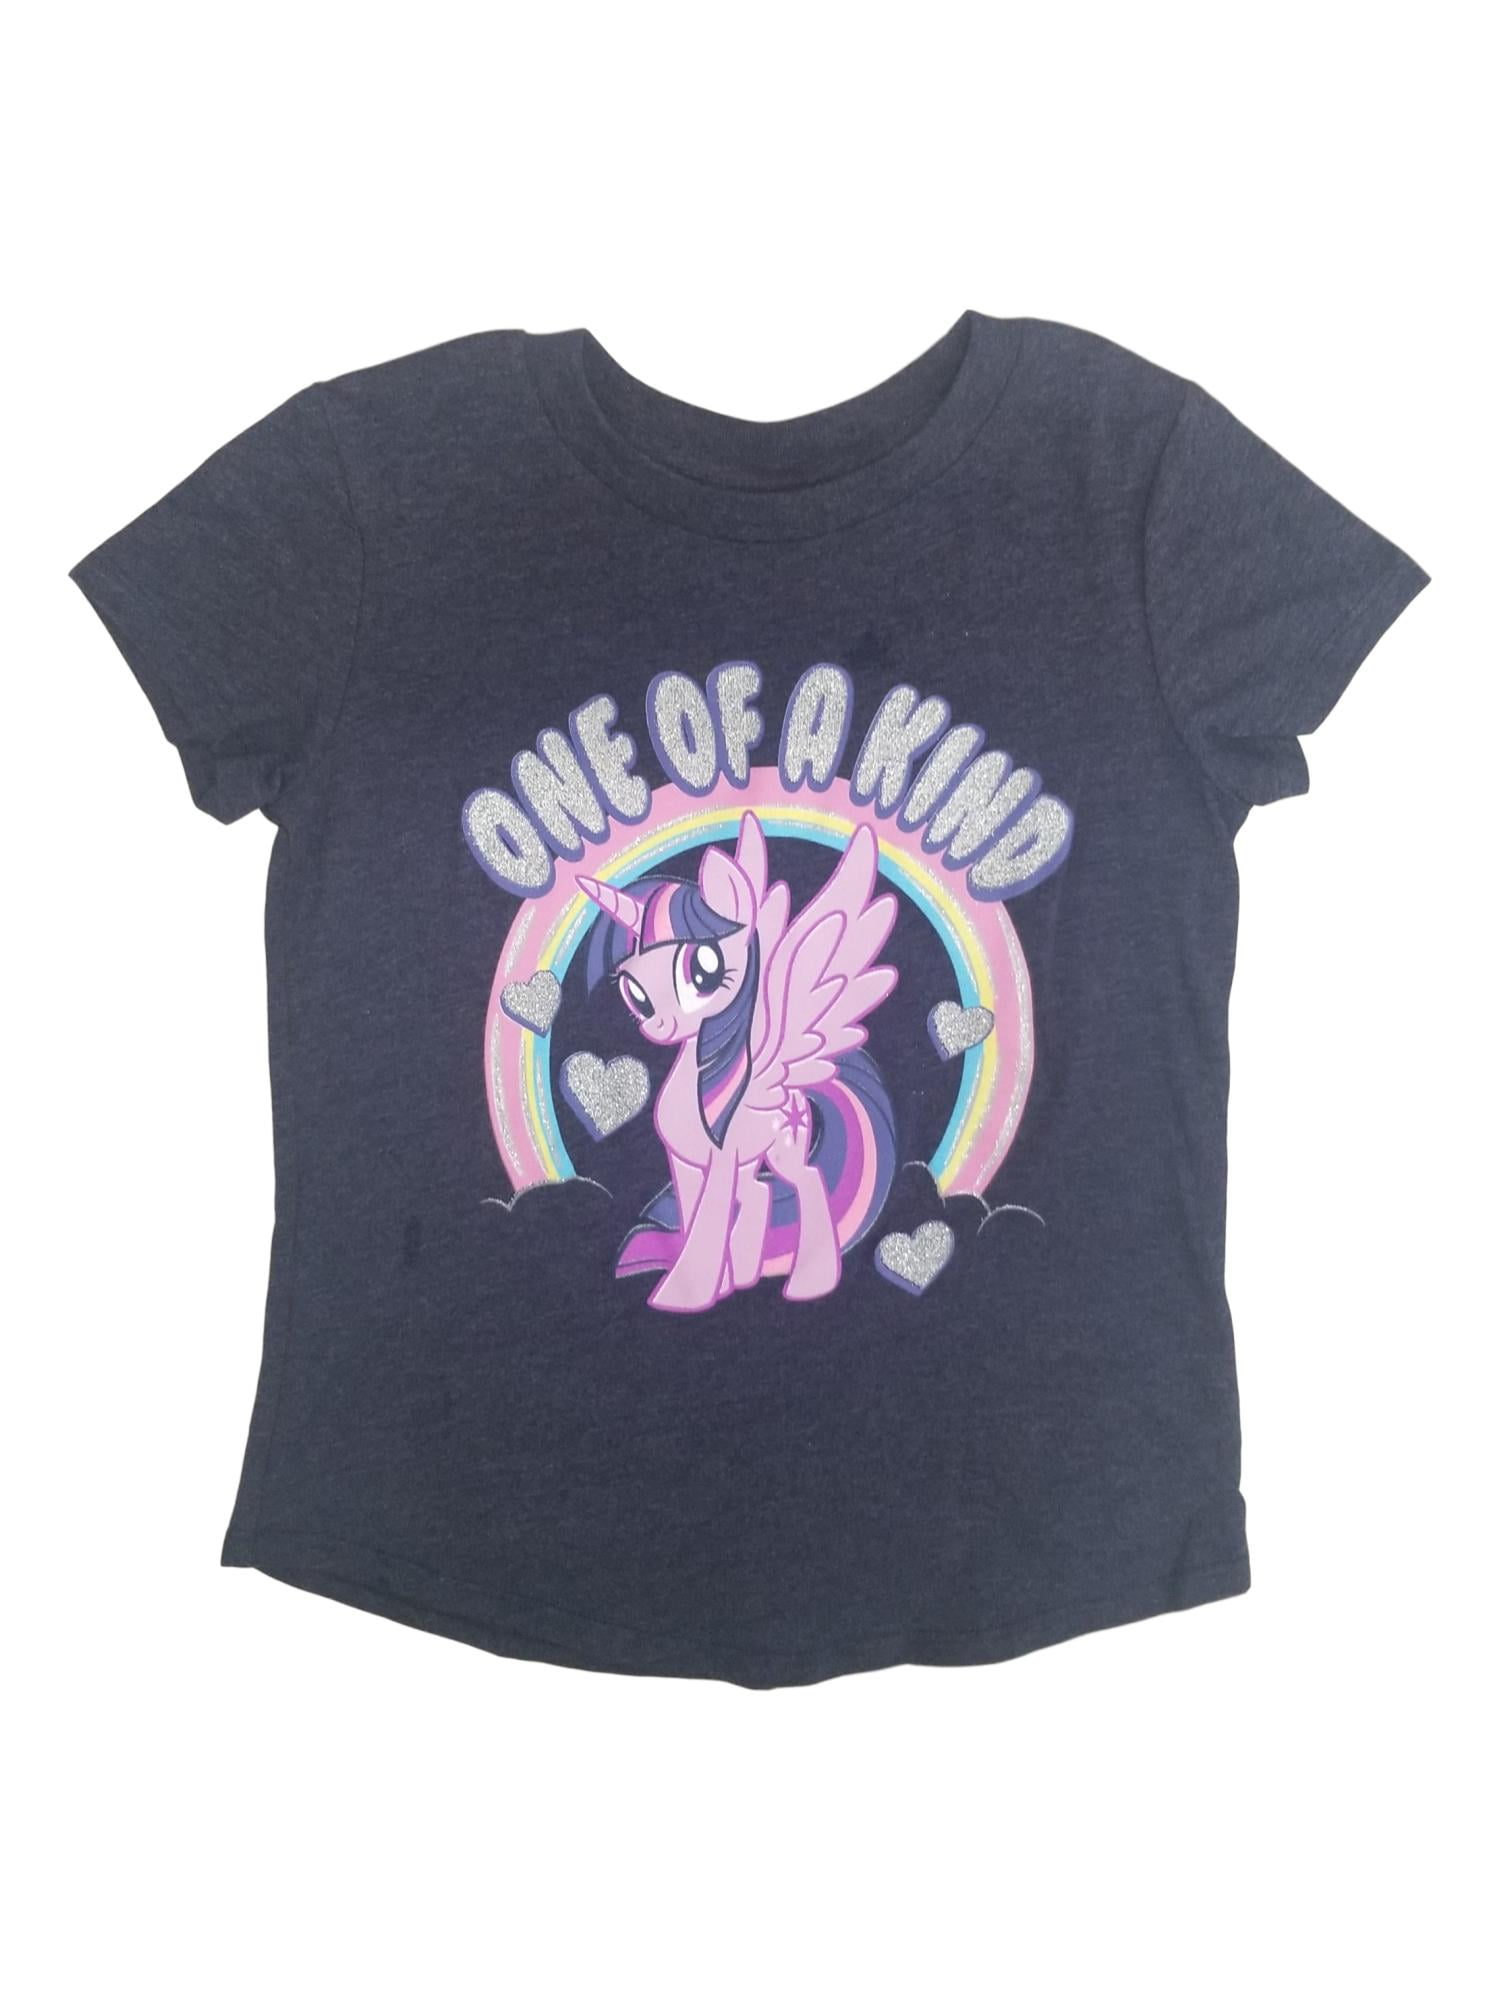 11 Years New Girls My Little Pony T Shirts 3 Designs Age 18 Months 